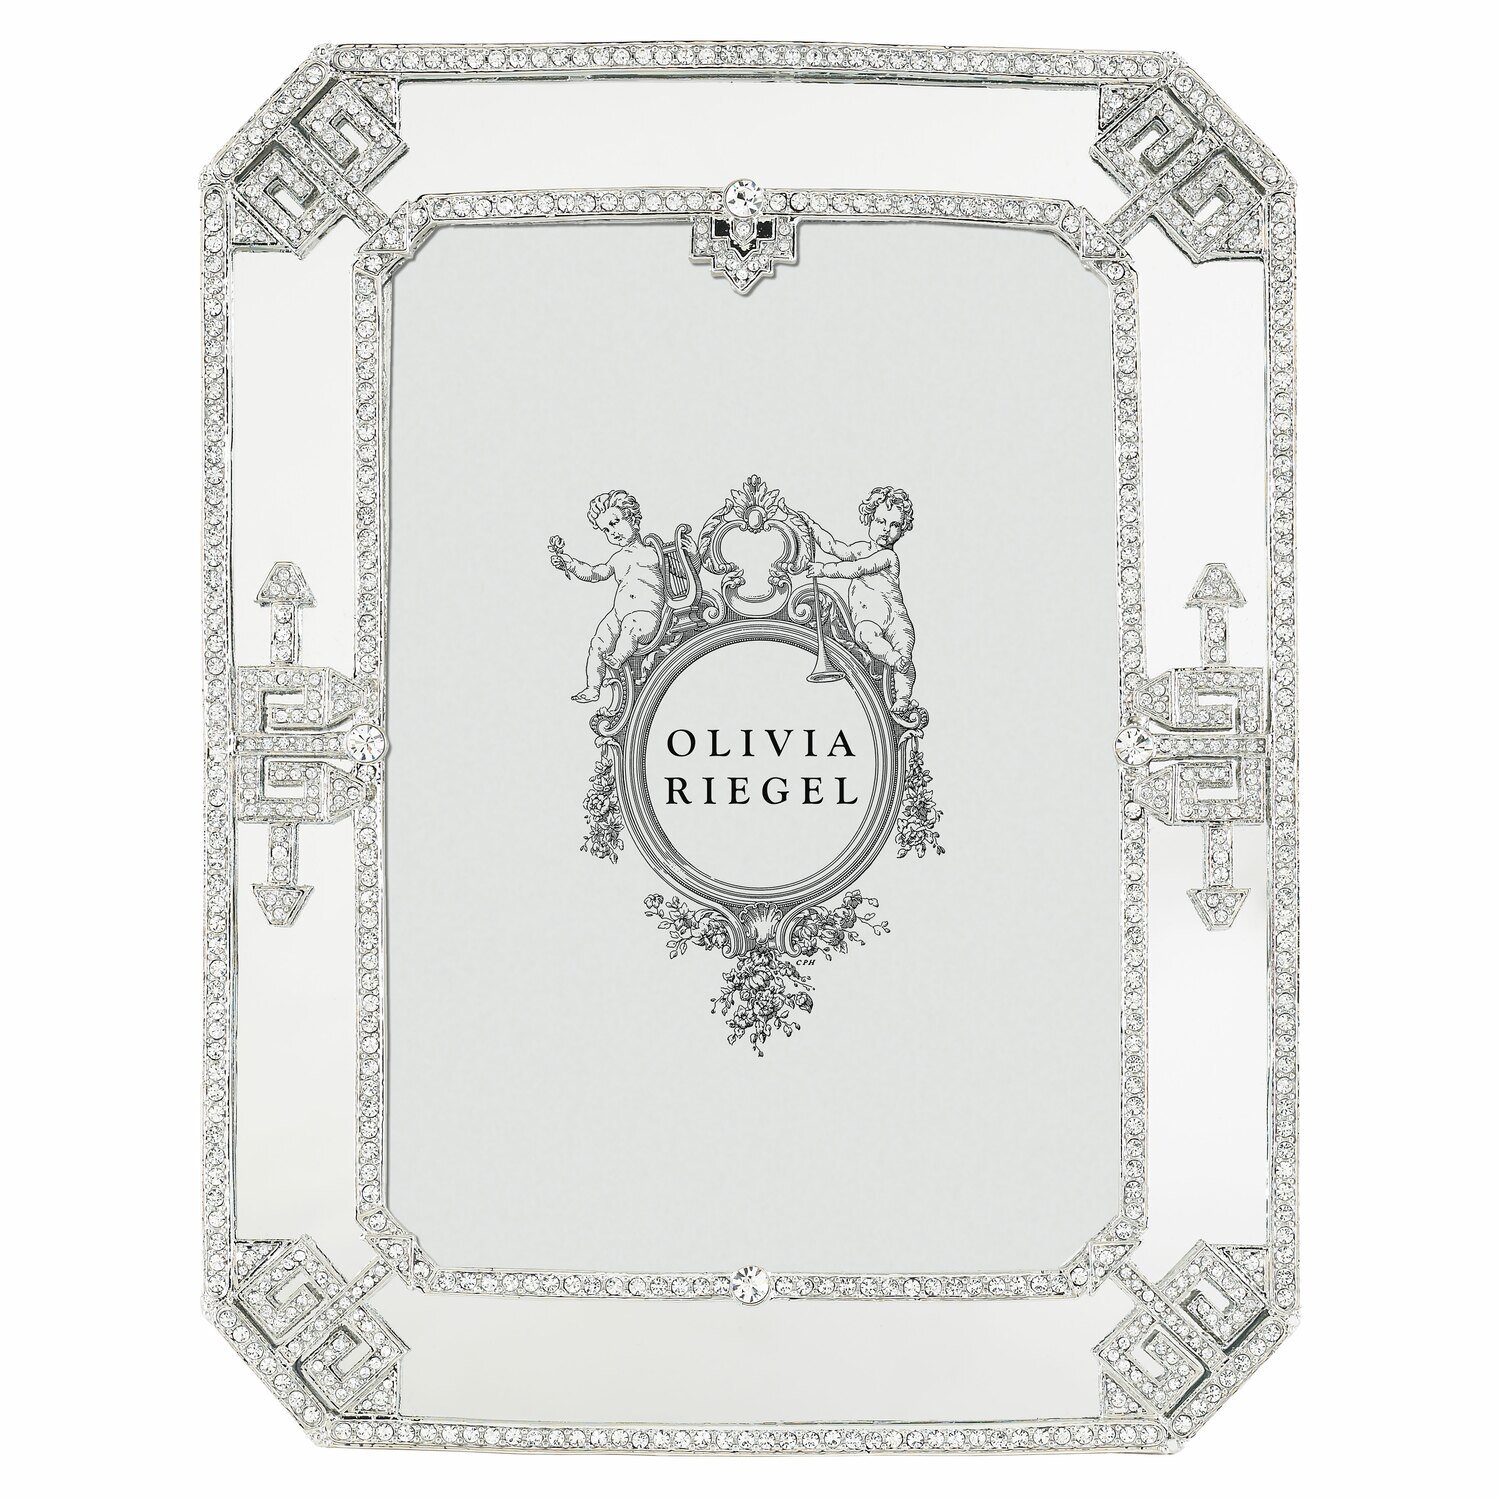 Olivia Riegel Deco Mirror 5 x 7 Inch Picture Frame RT9014